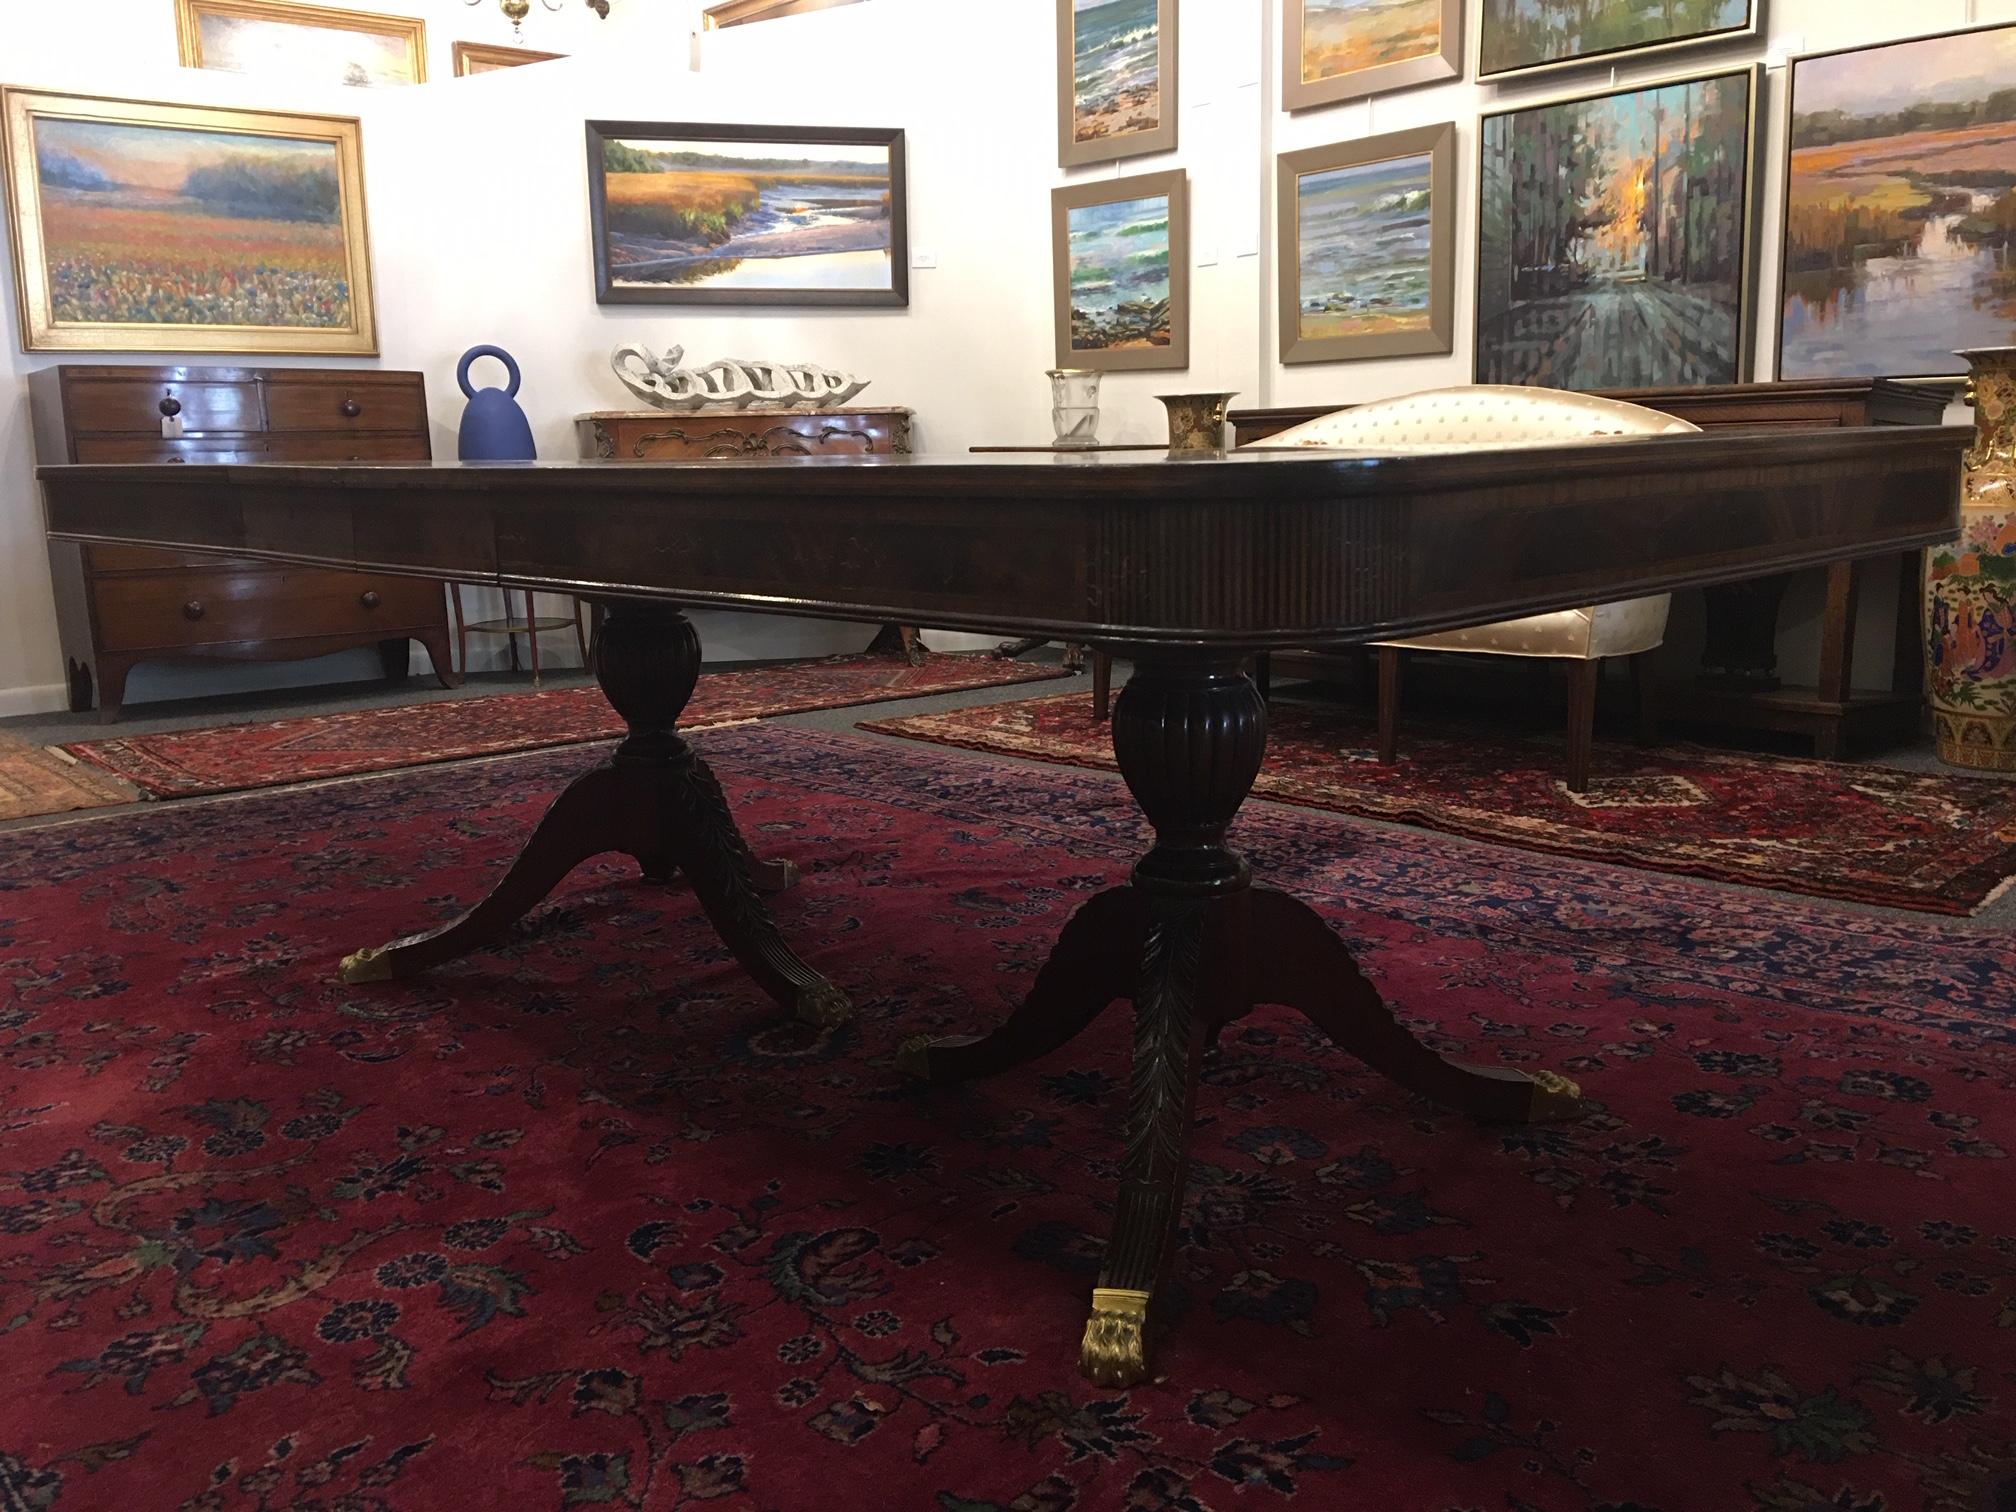 Georgian Banquet English Mahogany Dining Room Table with Pedestals & Leaves, 19th Century